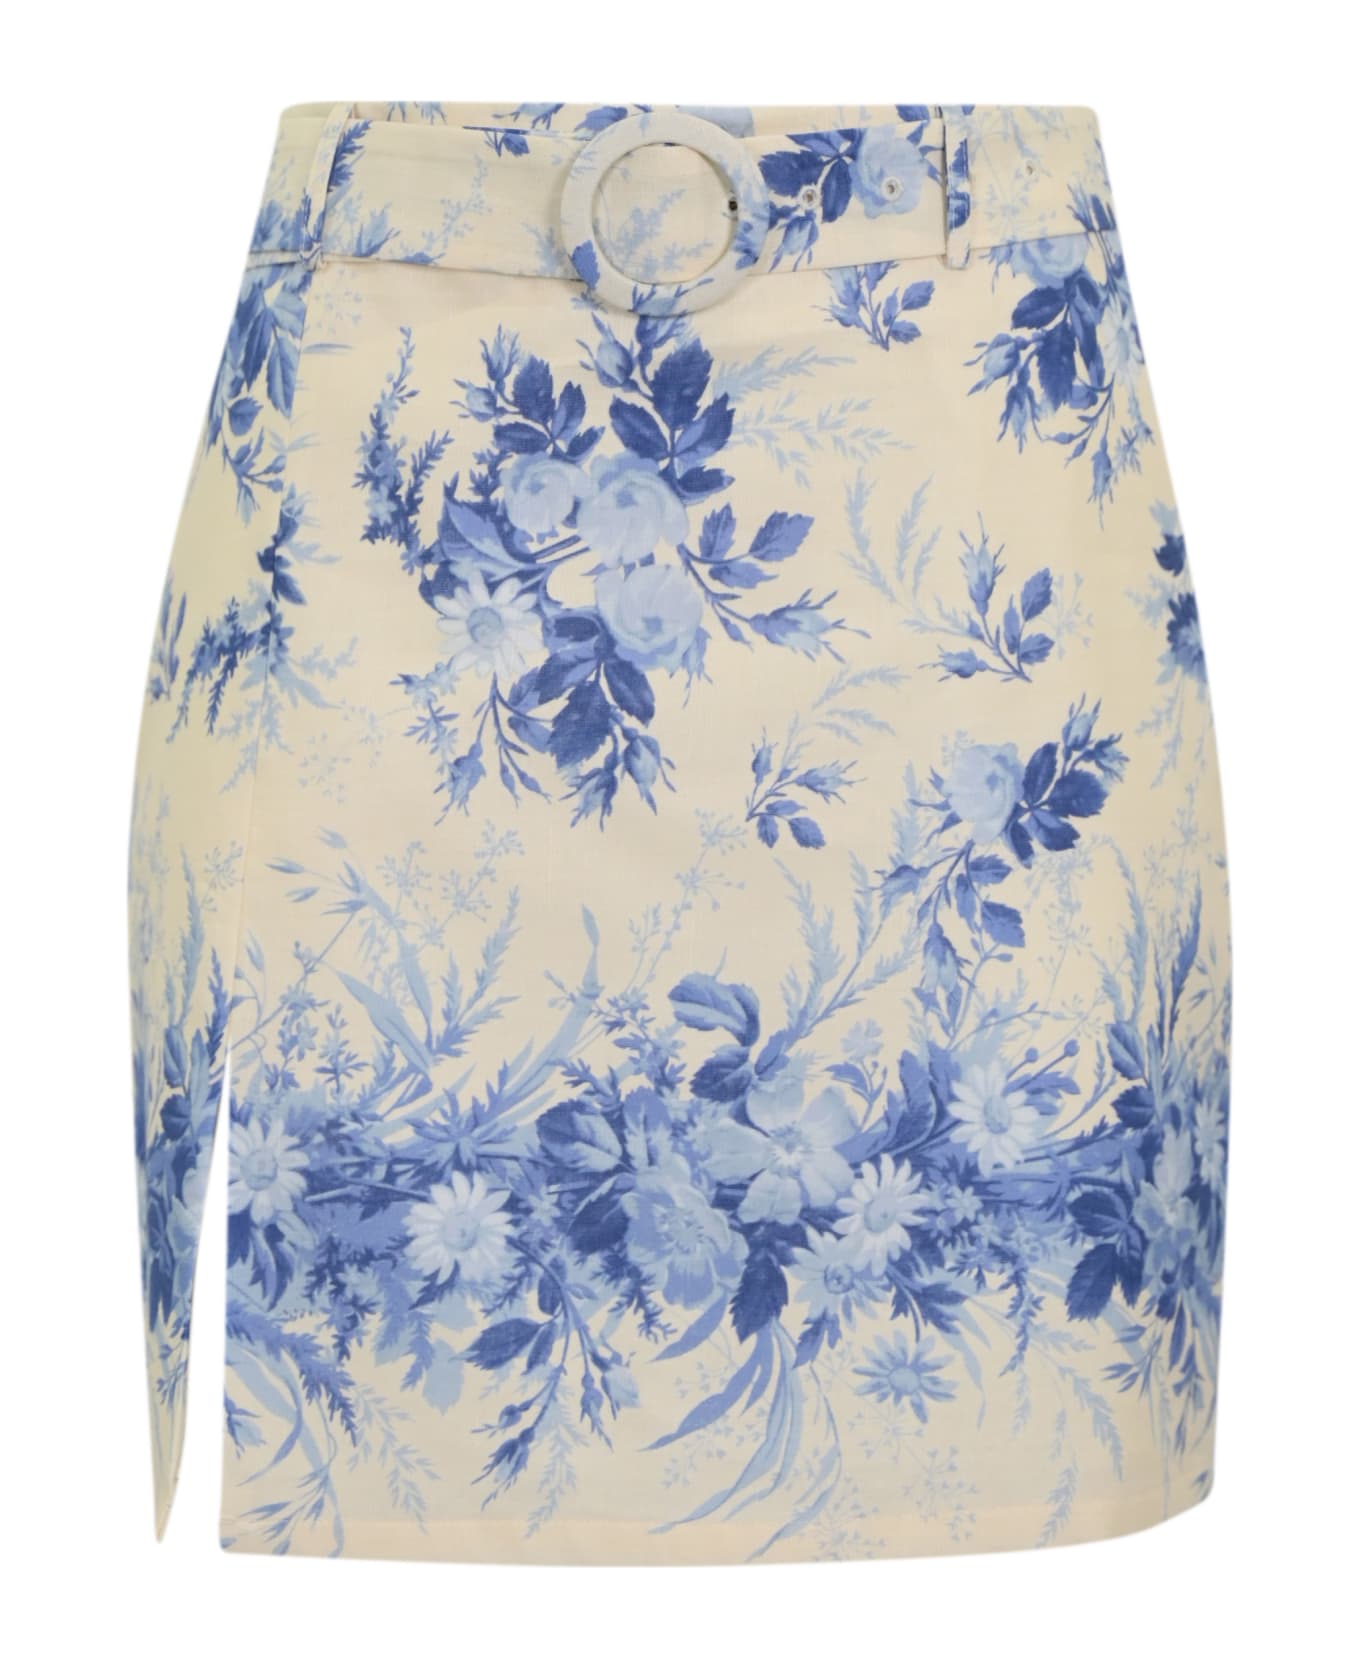 TwinSet Linen Skirt With Print - St.toile de jouy